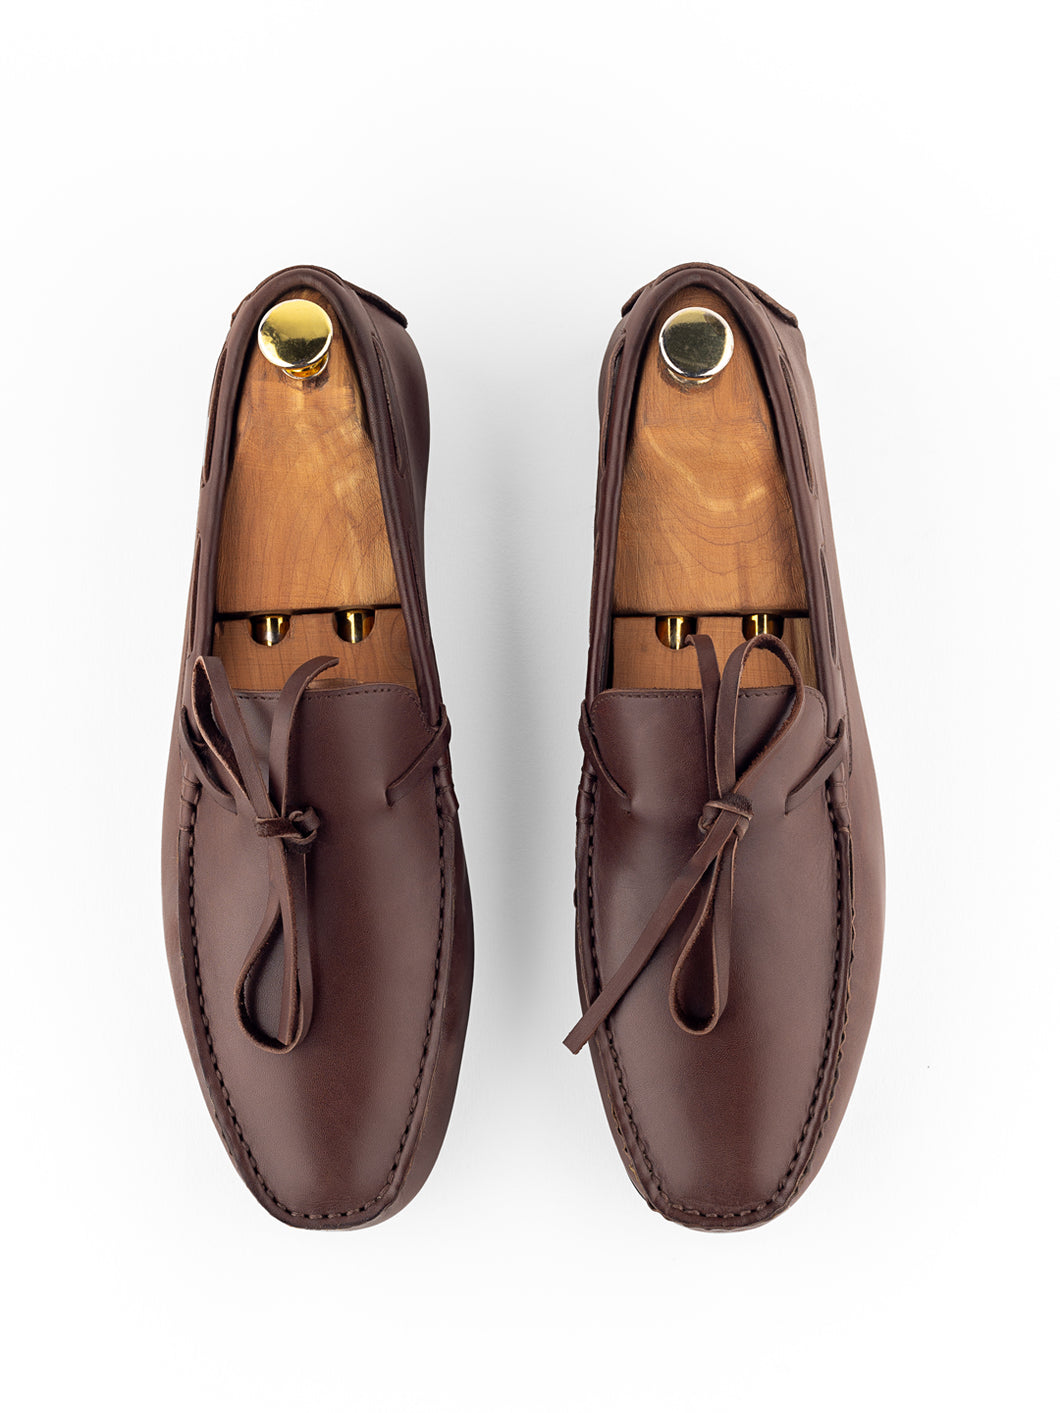 JAGGER BOMB LUXURY LOAFERS